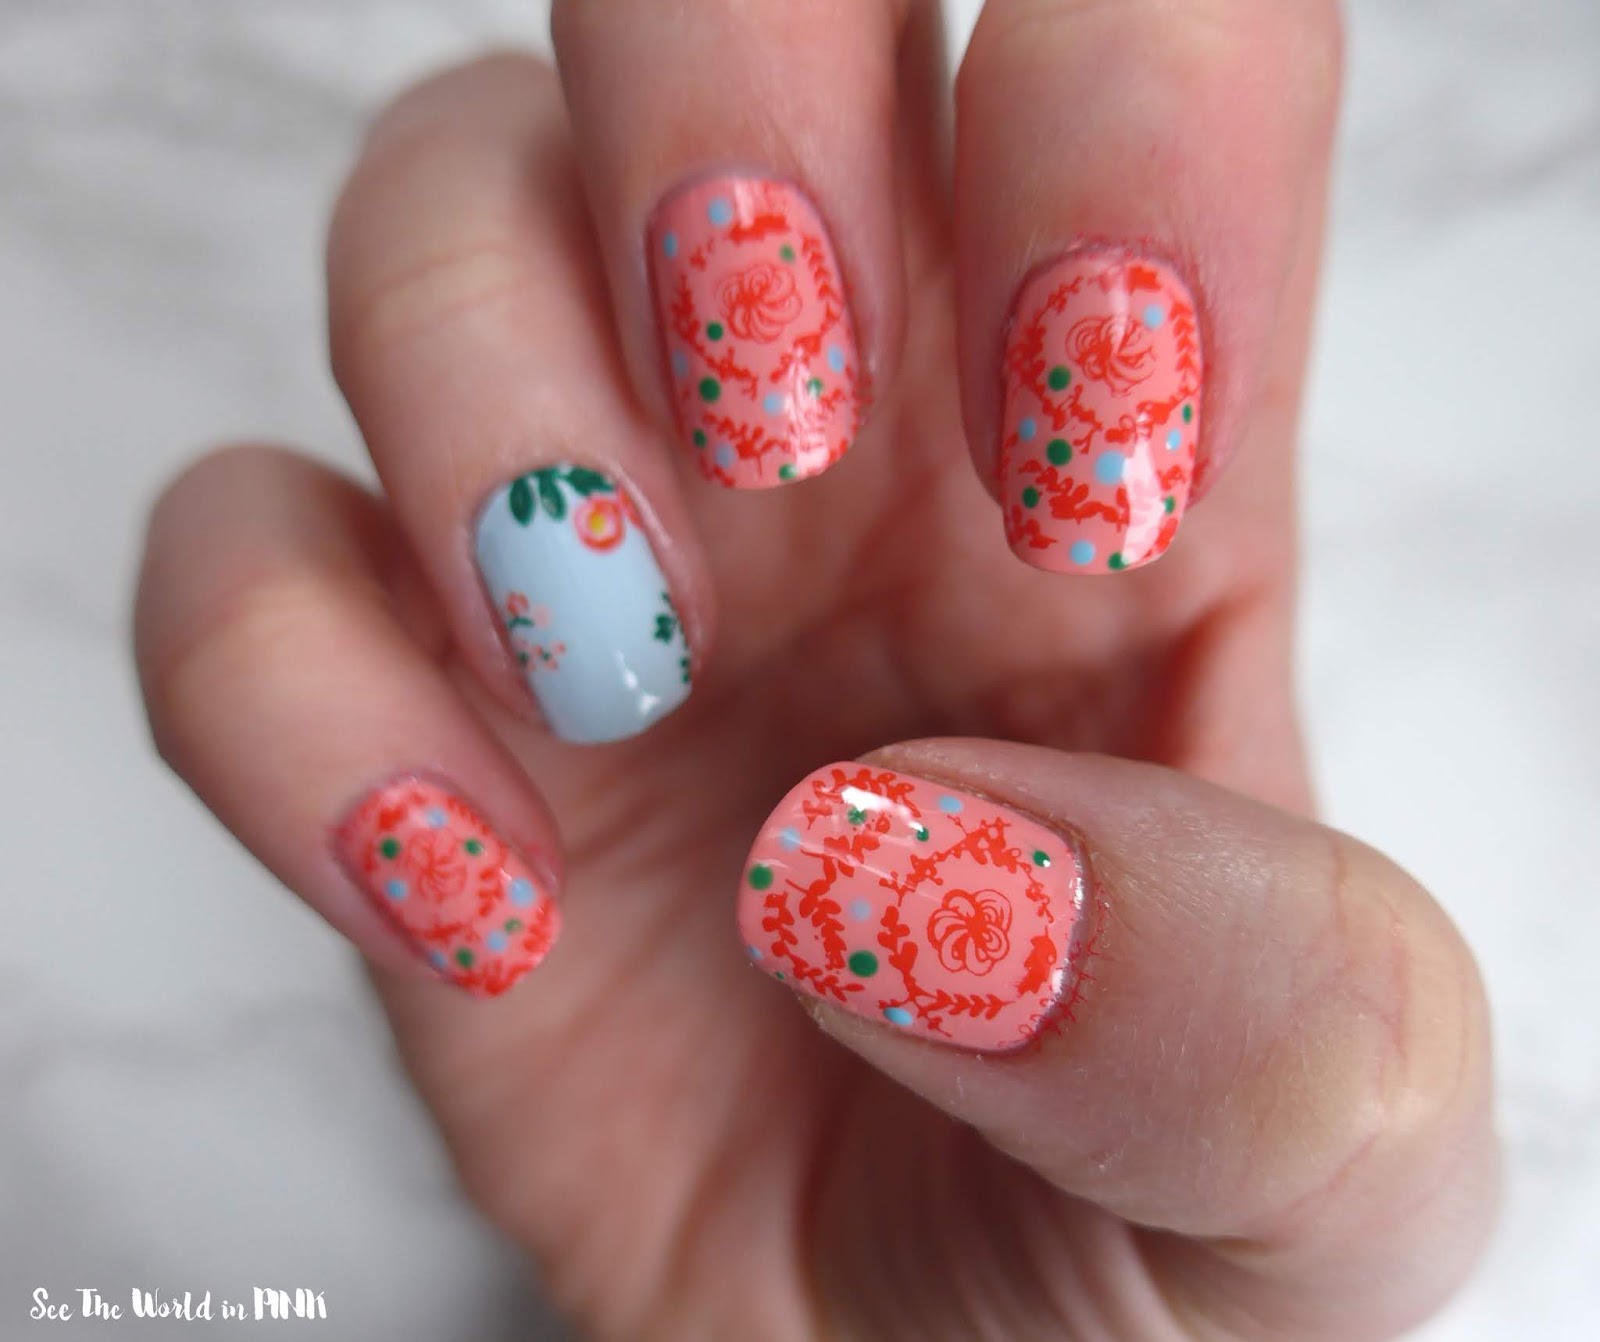 Manicure Monday - Eclectic Coral Stamped Floral Nails